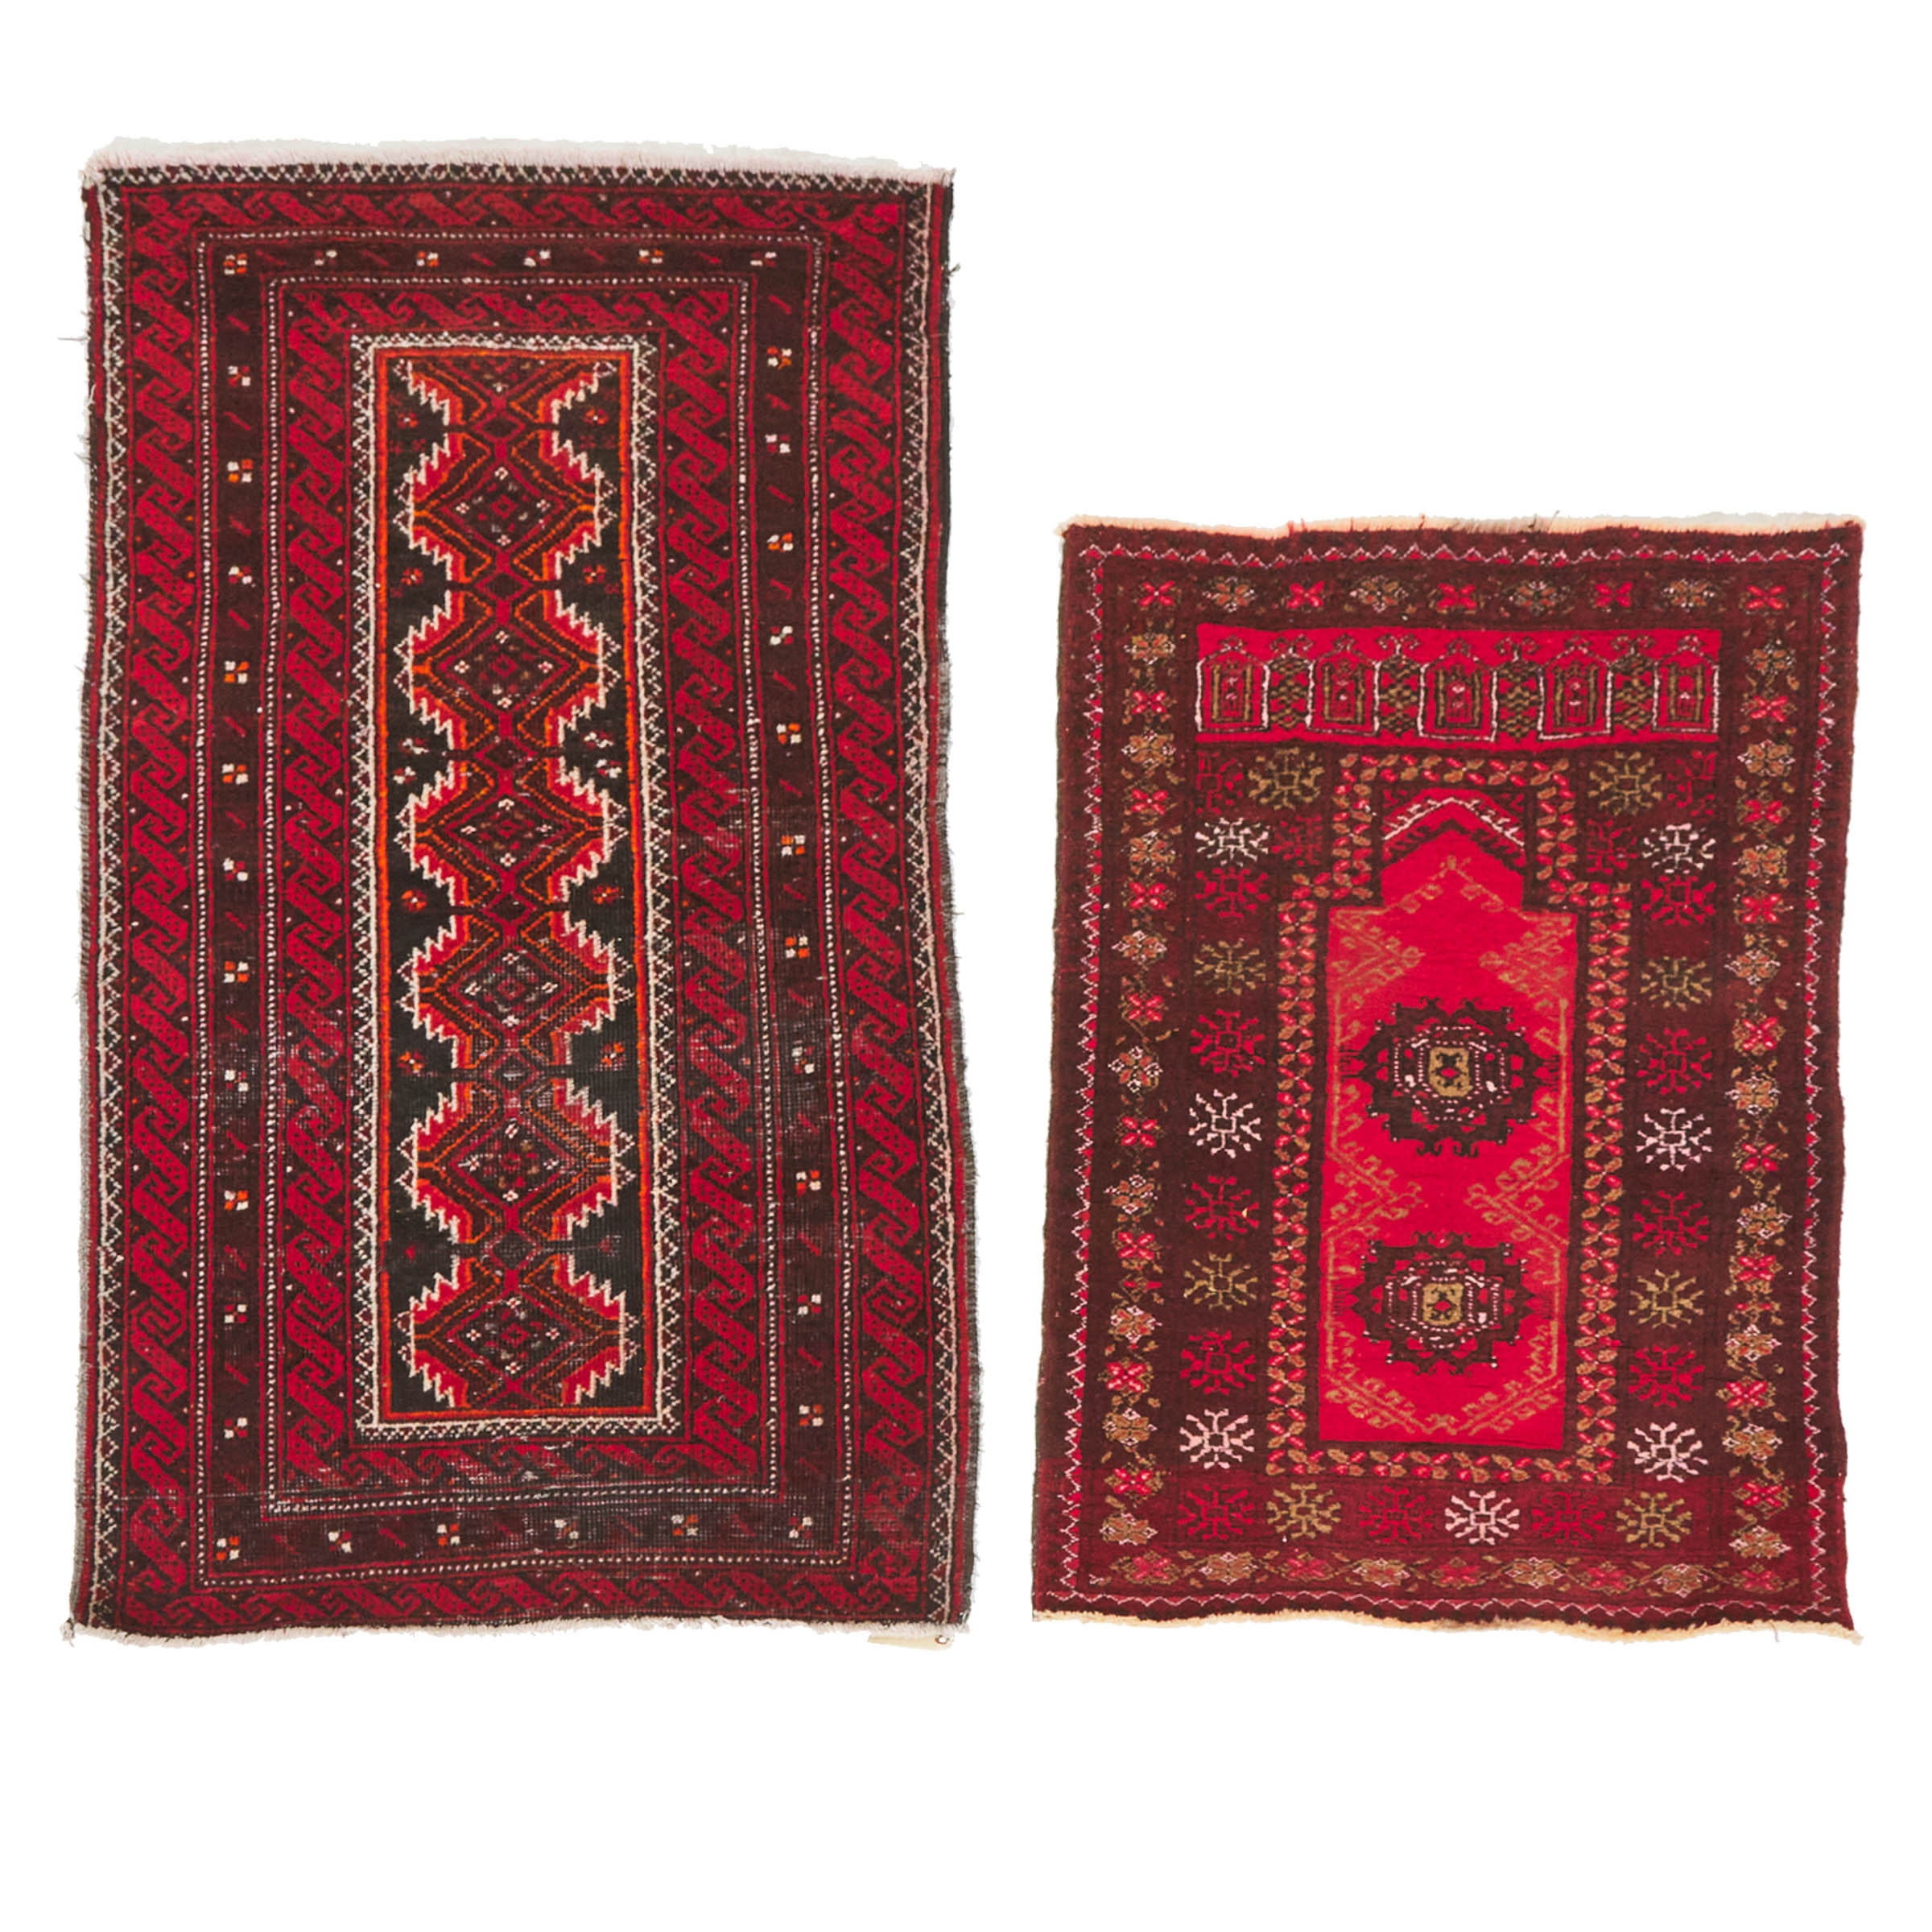 Belouchi Rug together with an Afghan Prayer Rug, both Persian and c.1960